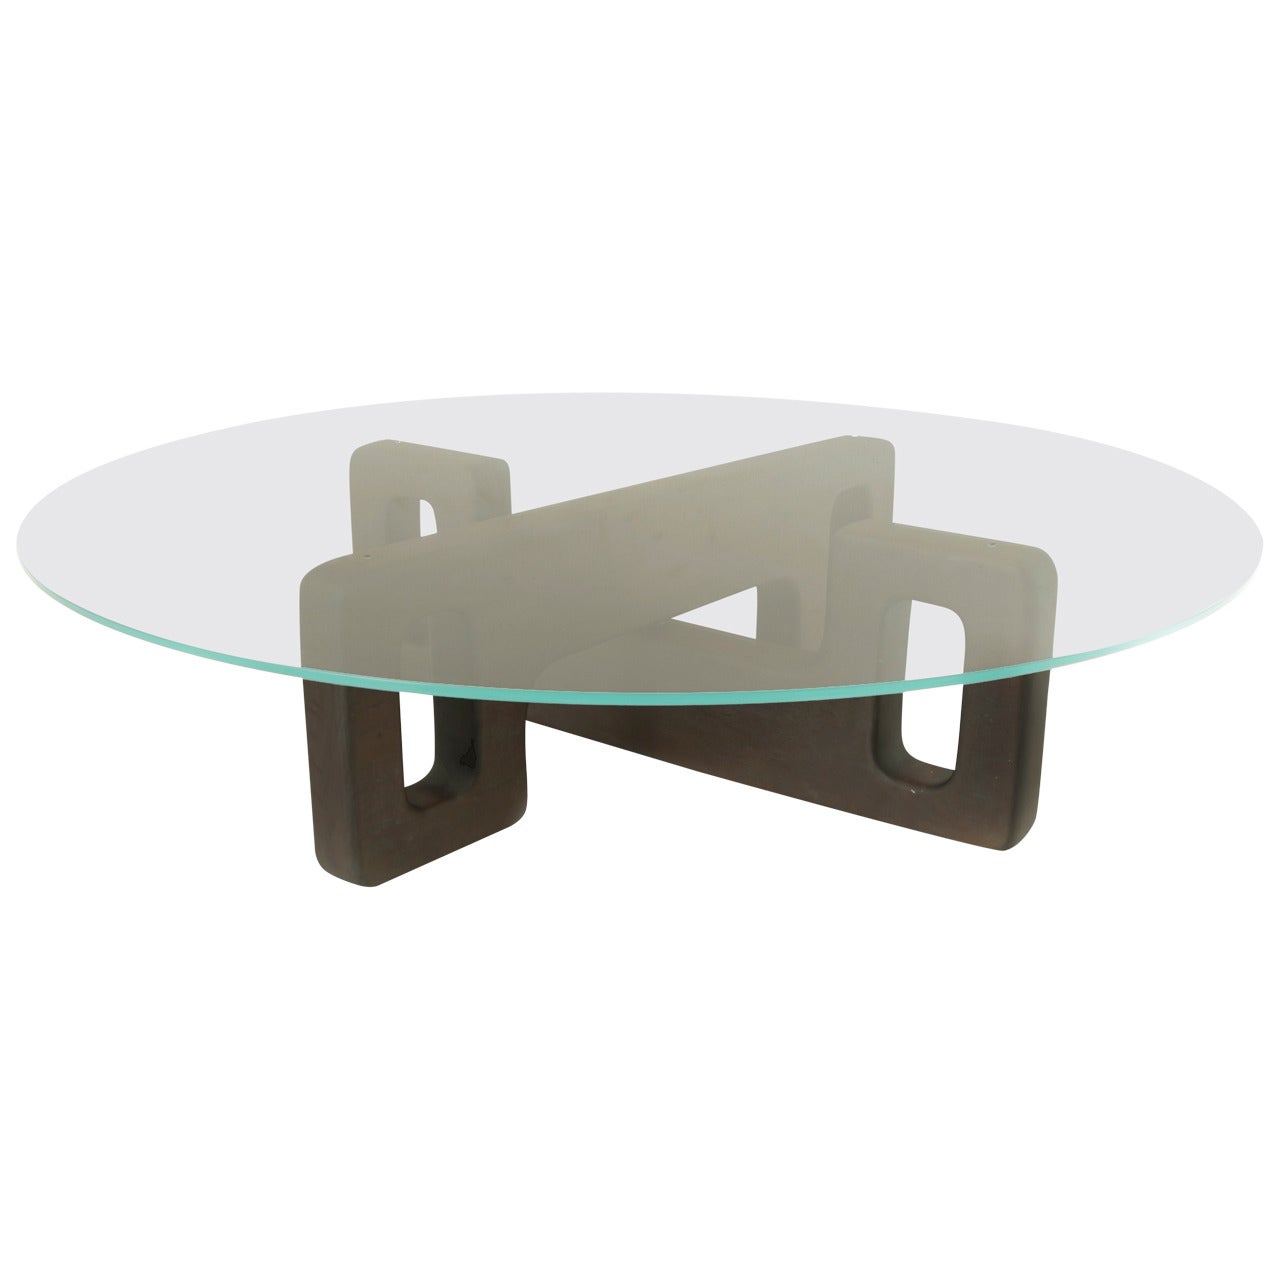 Sculptural Brazilian Cejera wood and Glass Coffee Table For Sale